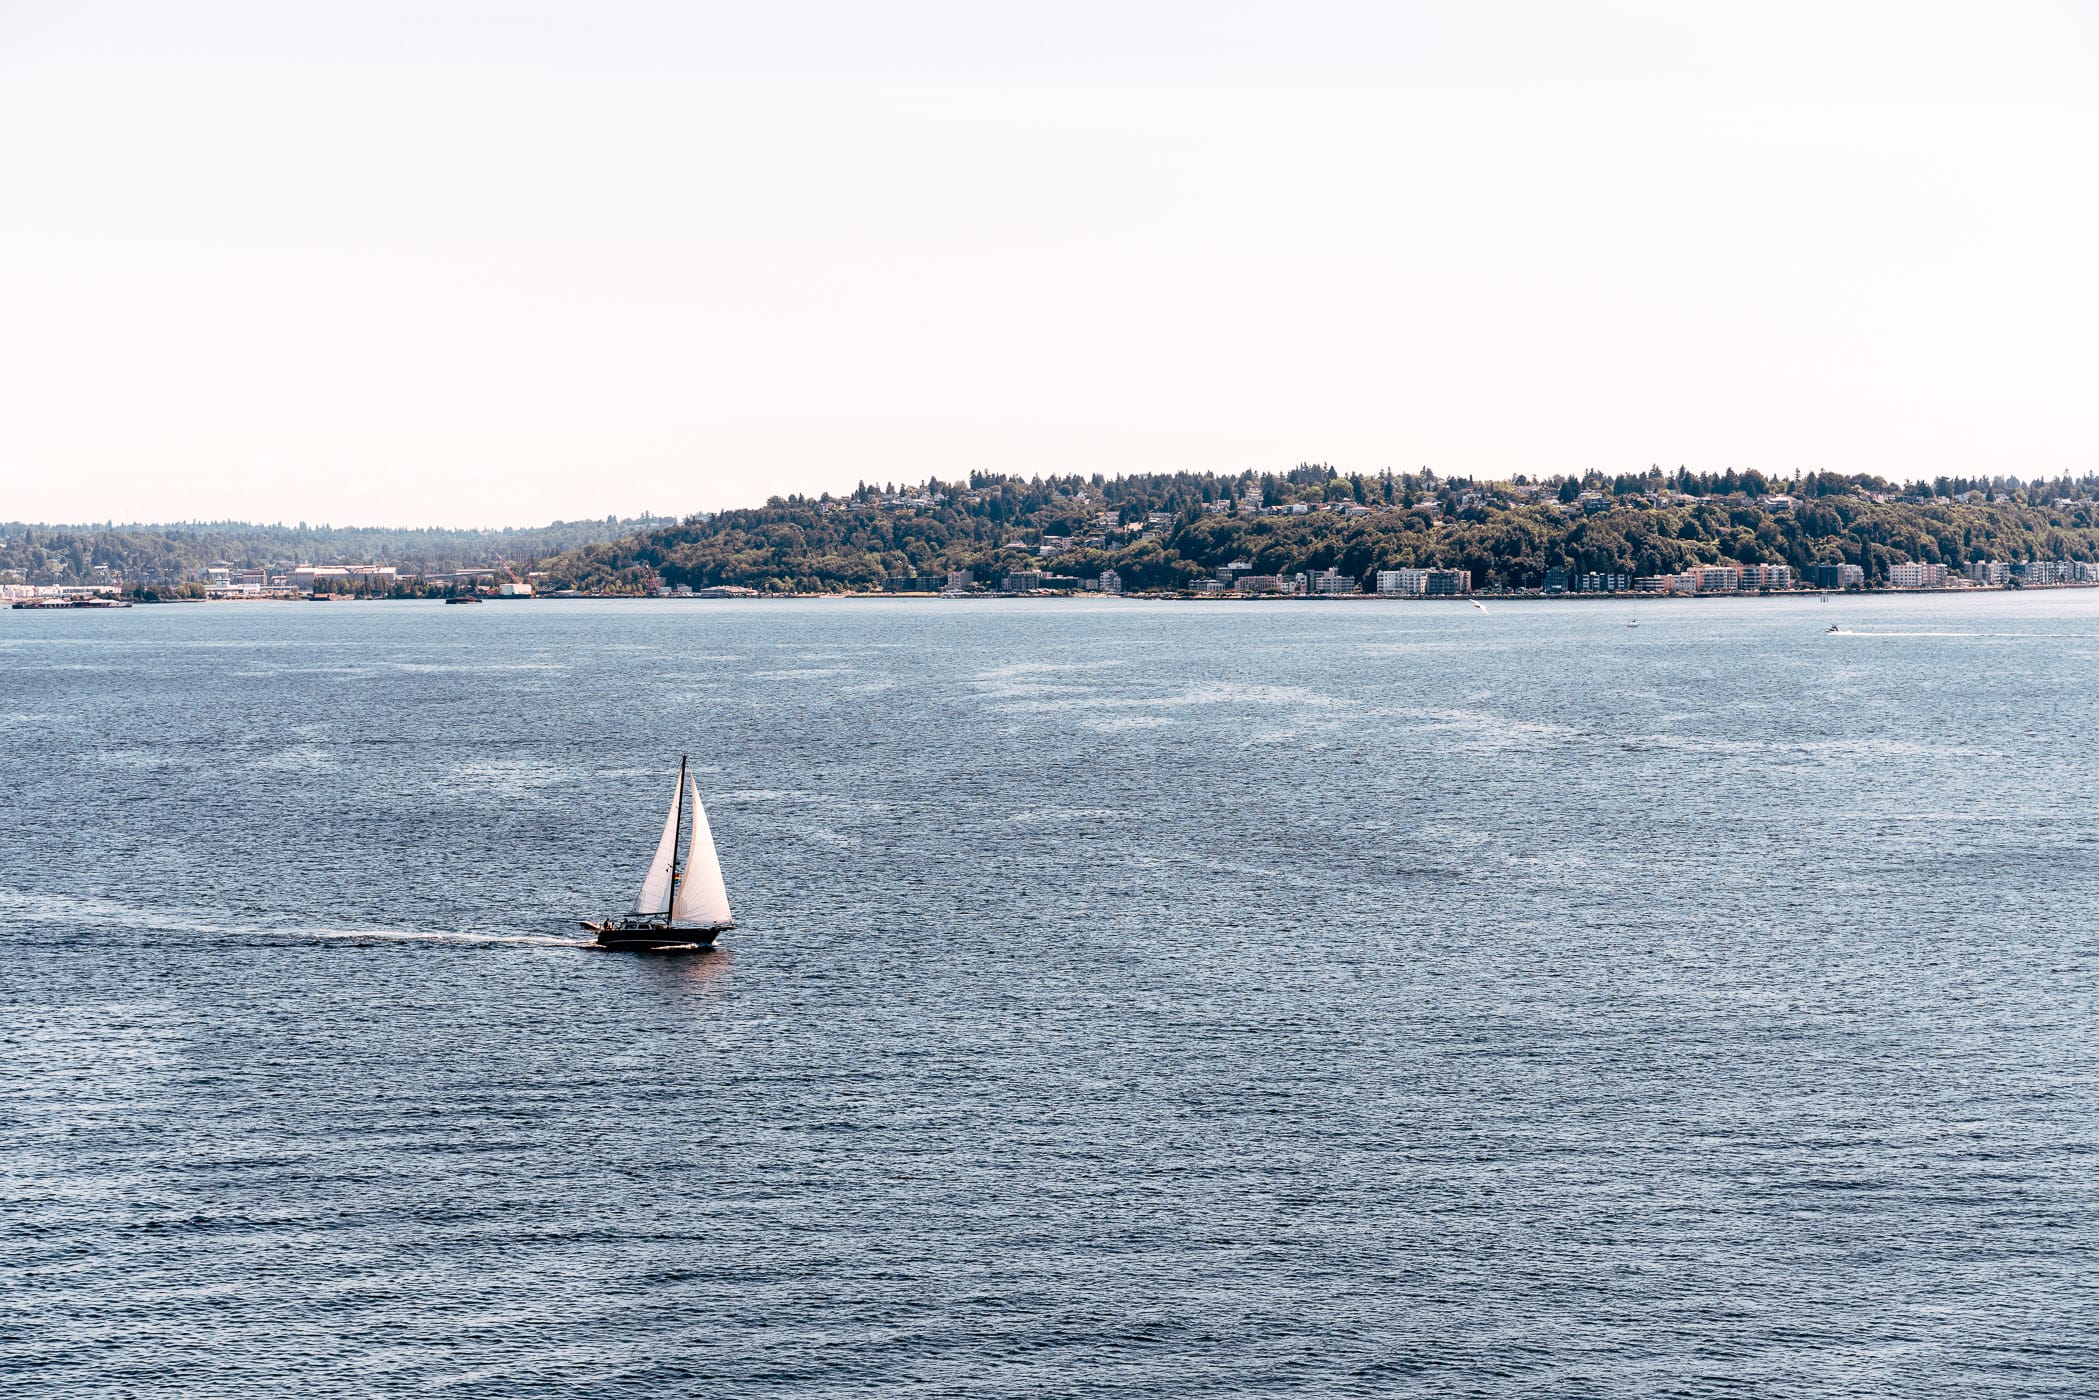 A sailboat plies the waters of the Puget Sound in the Salish Sea near Seattle, Washington.